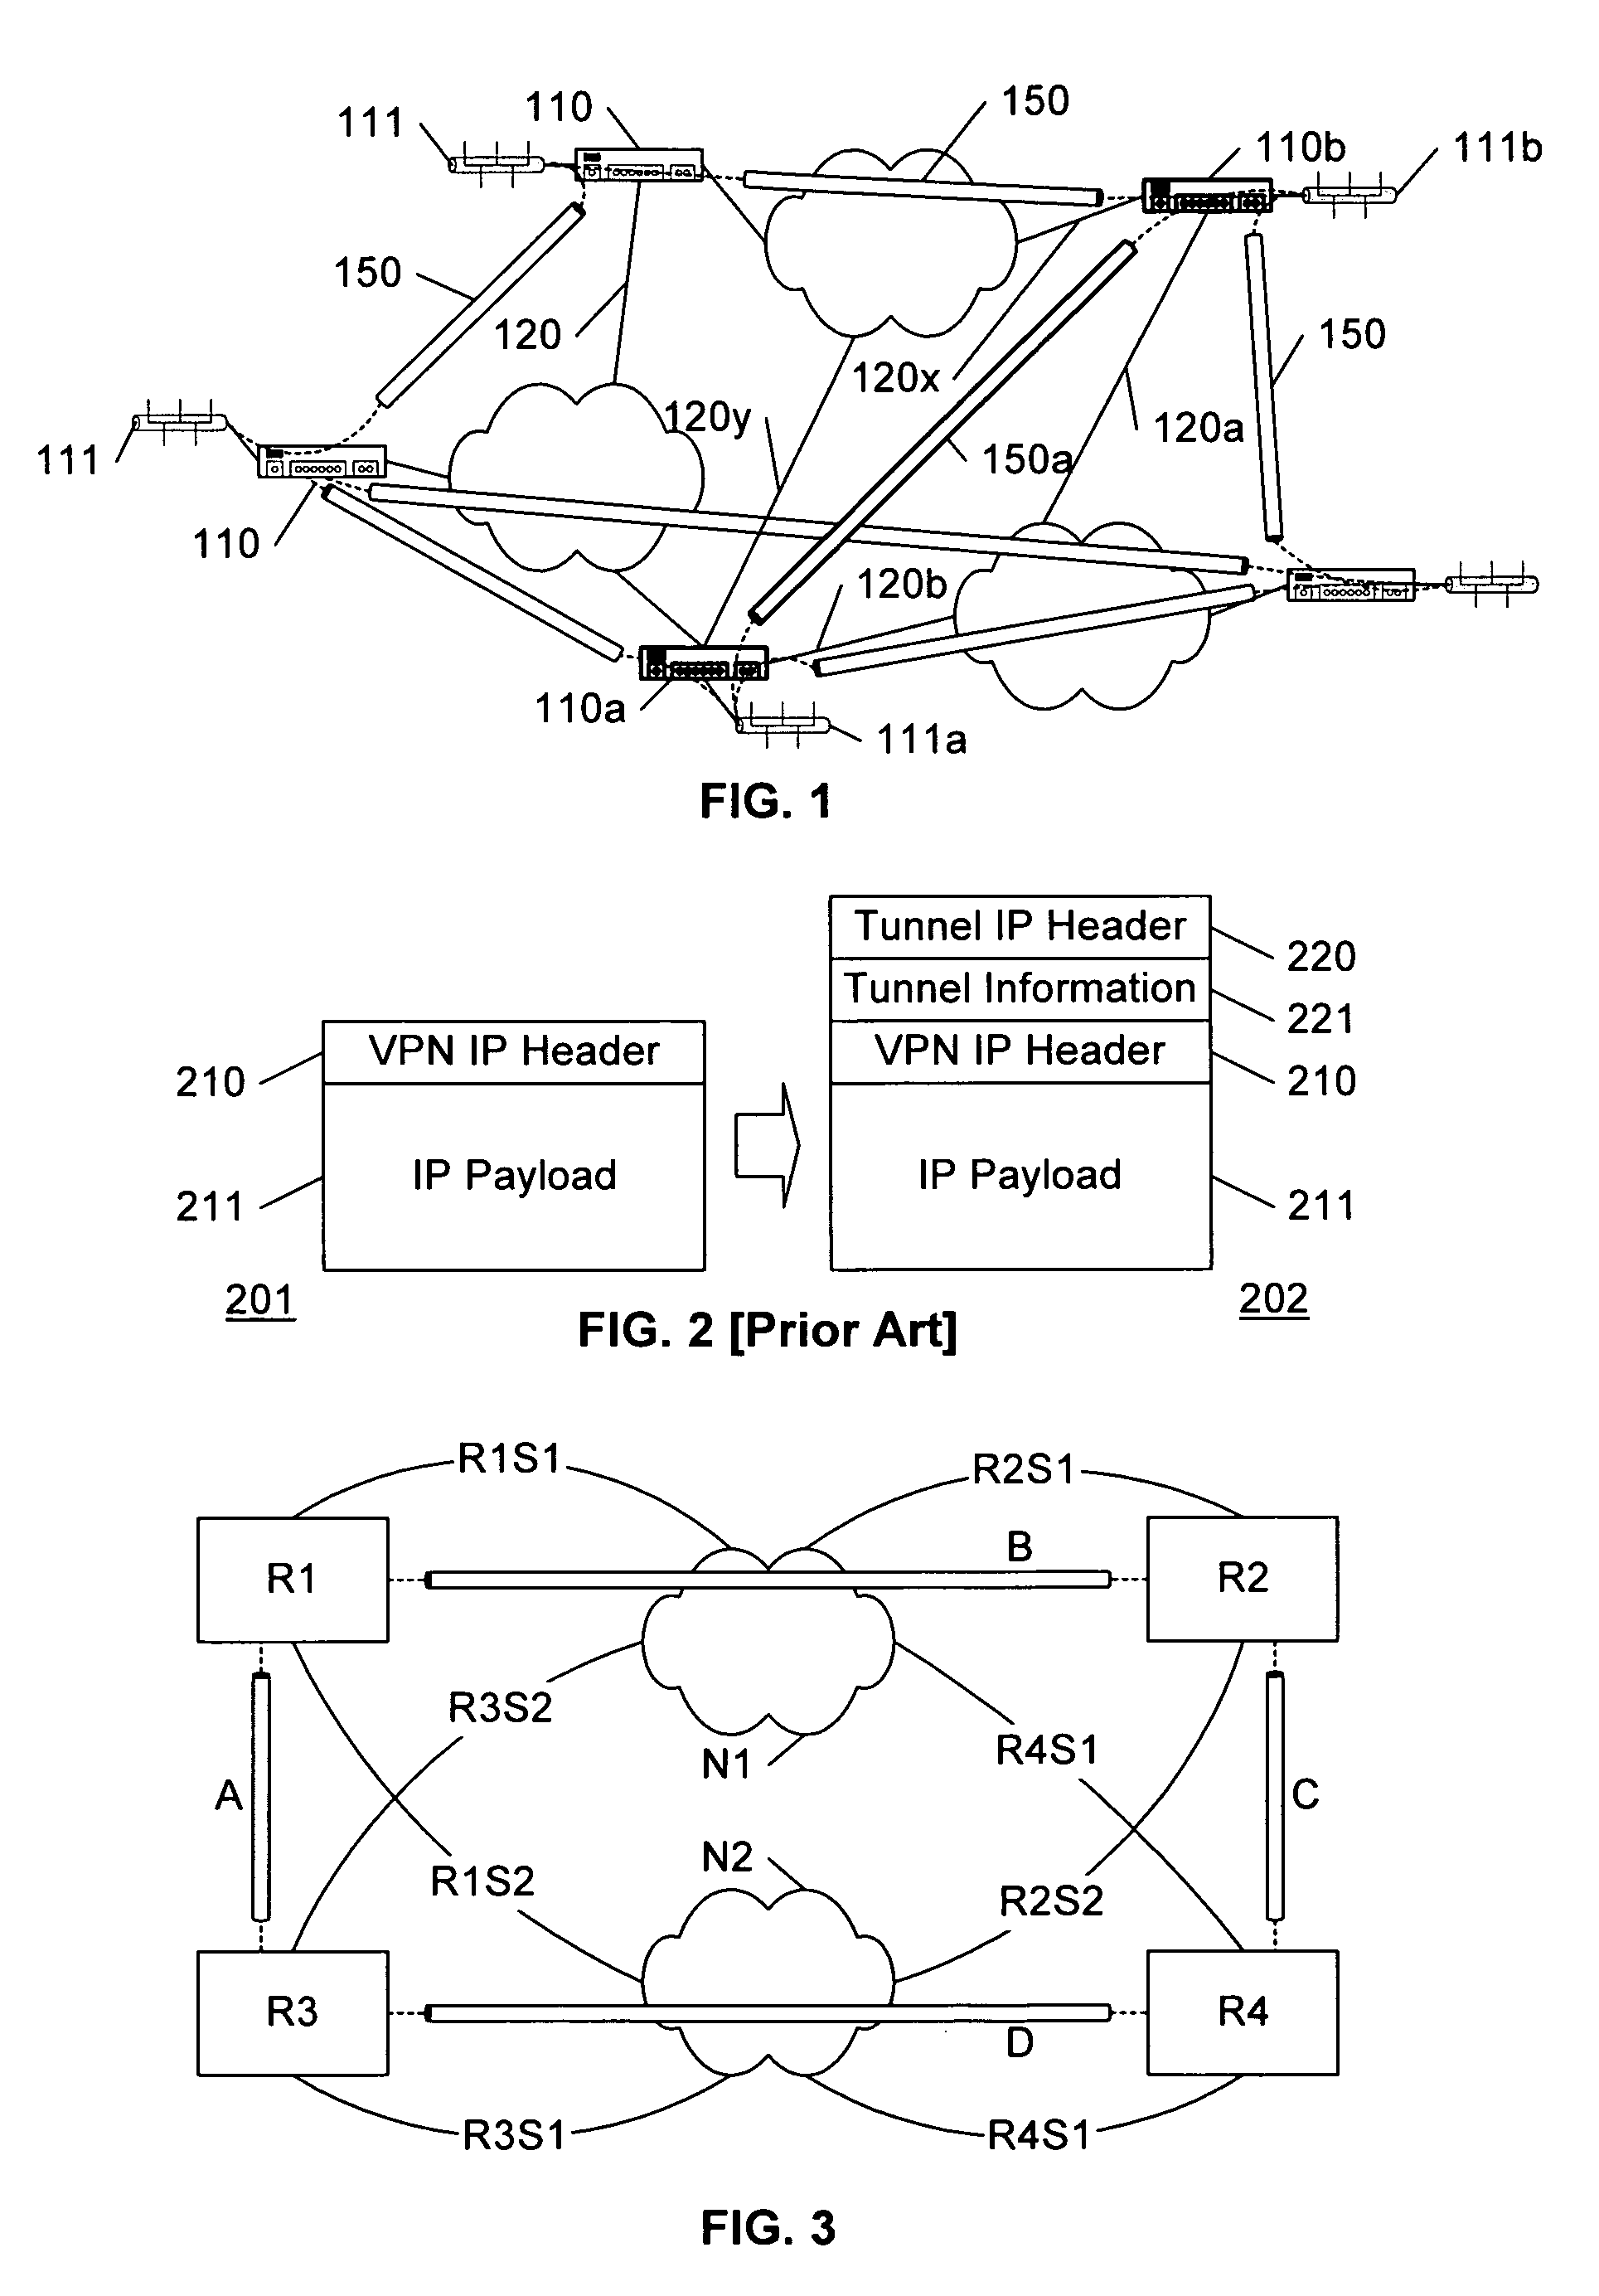 Network physical connection inference for IP tunnels